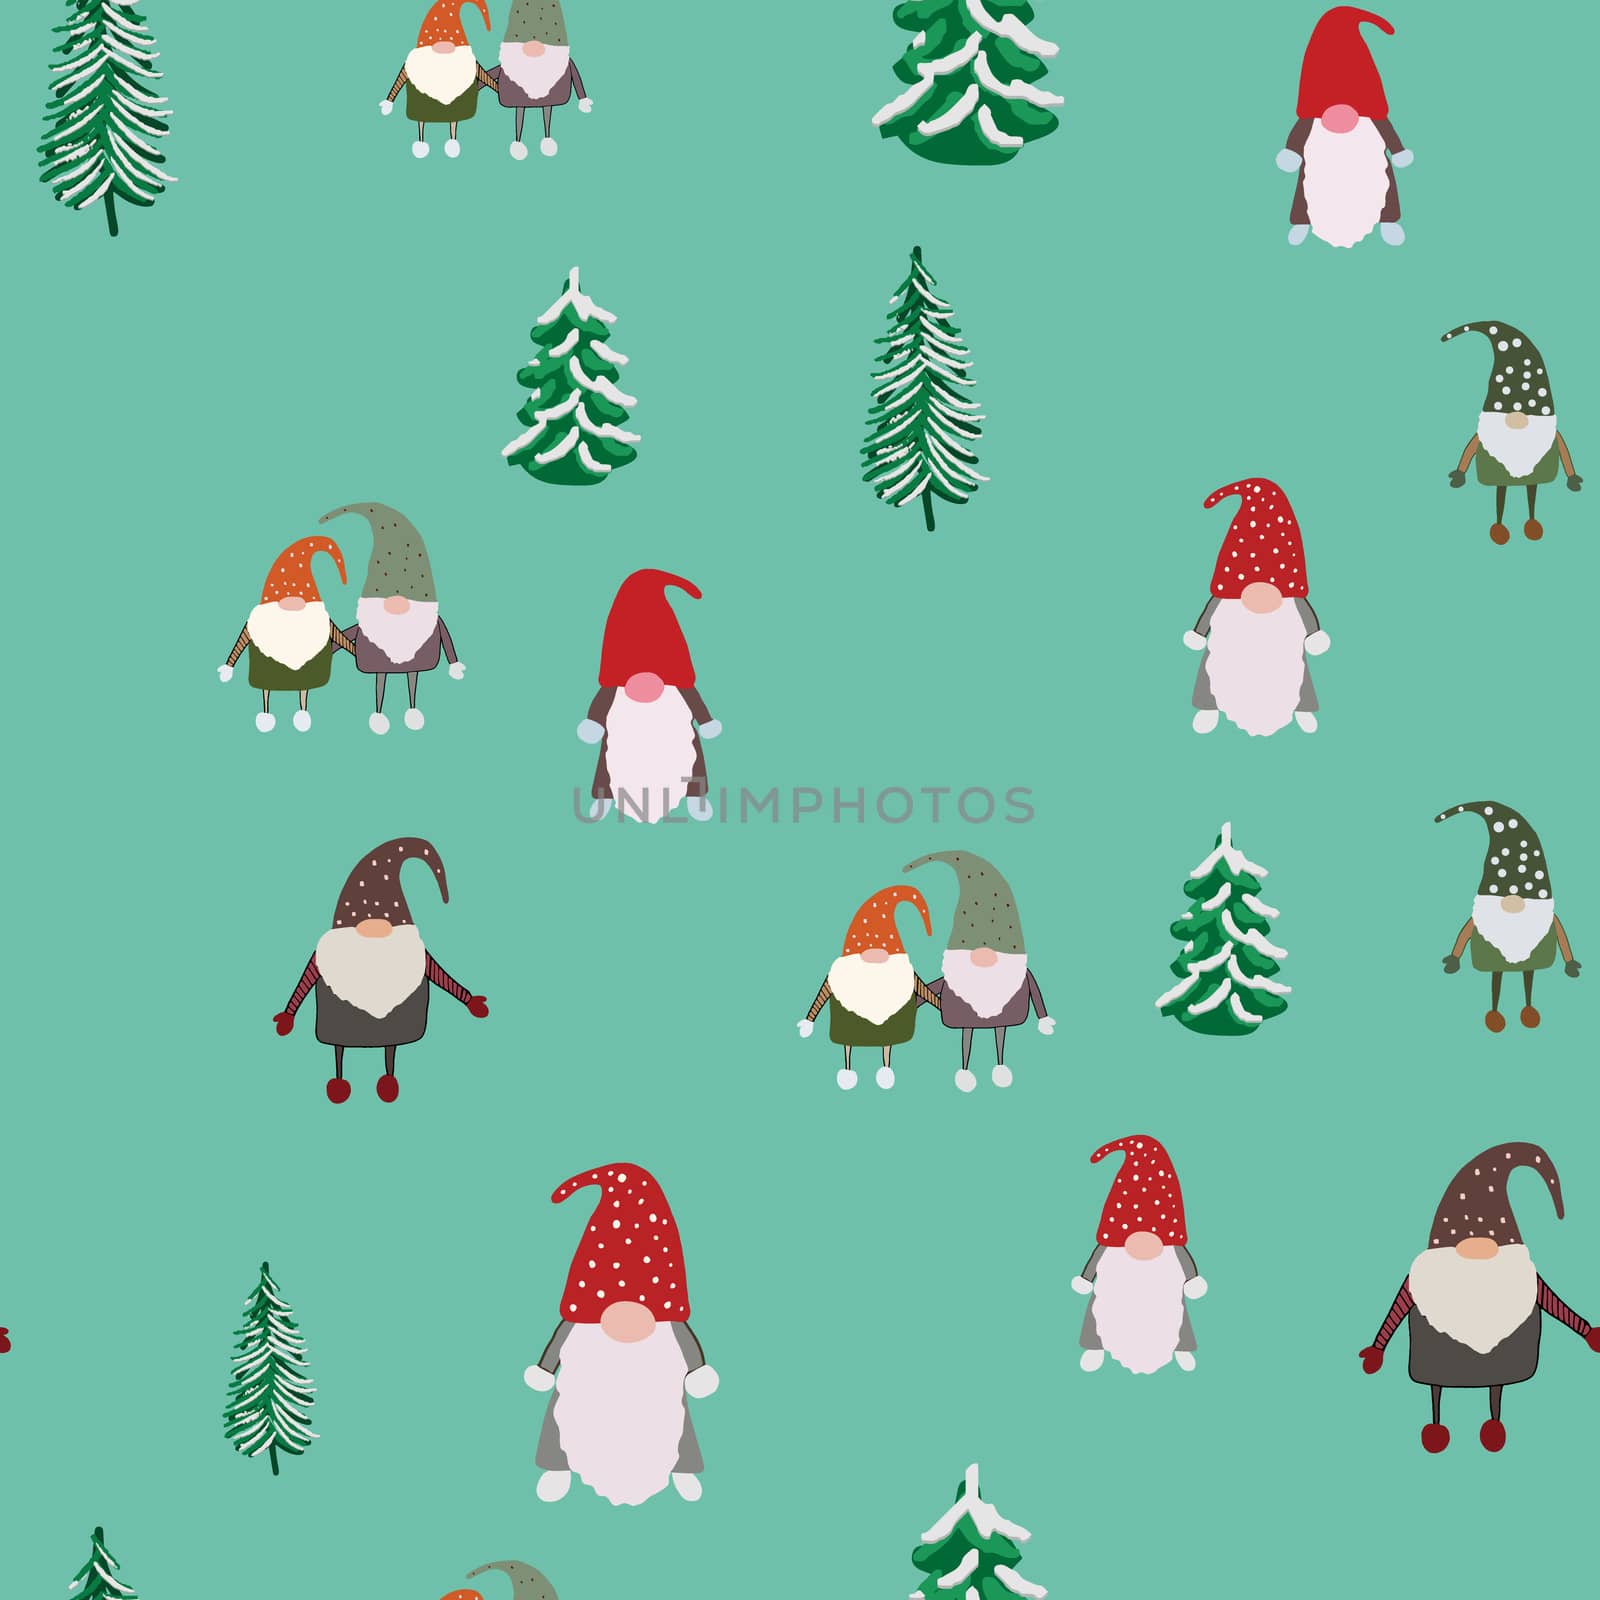 Seamless pattern with pine trees and scandinavian gnomes. Beautiful festive design with elves decorations. For wrapping paper, textiles, fabric. Flat cartoon style vector illustration.